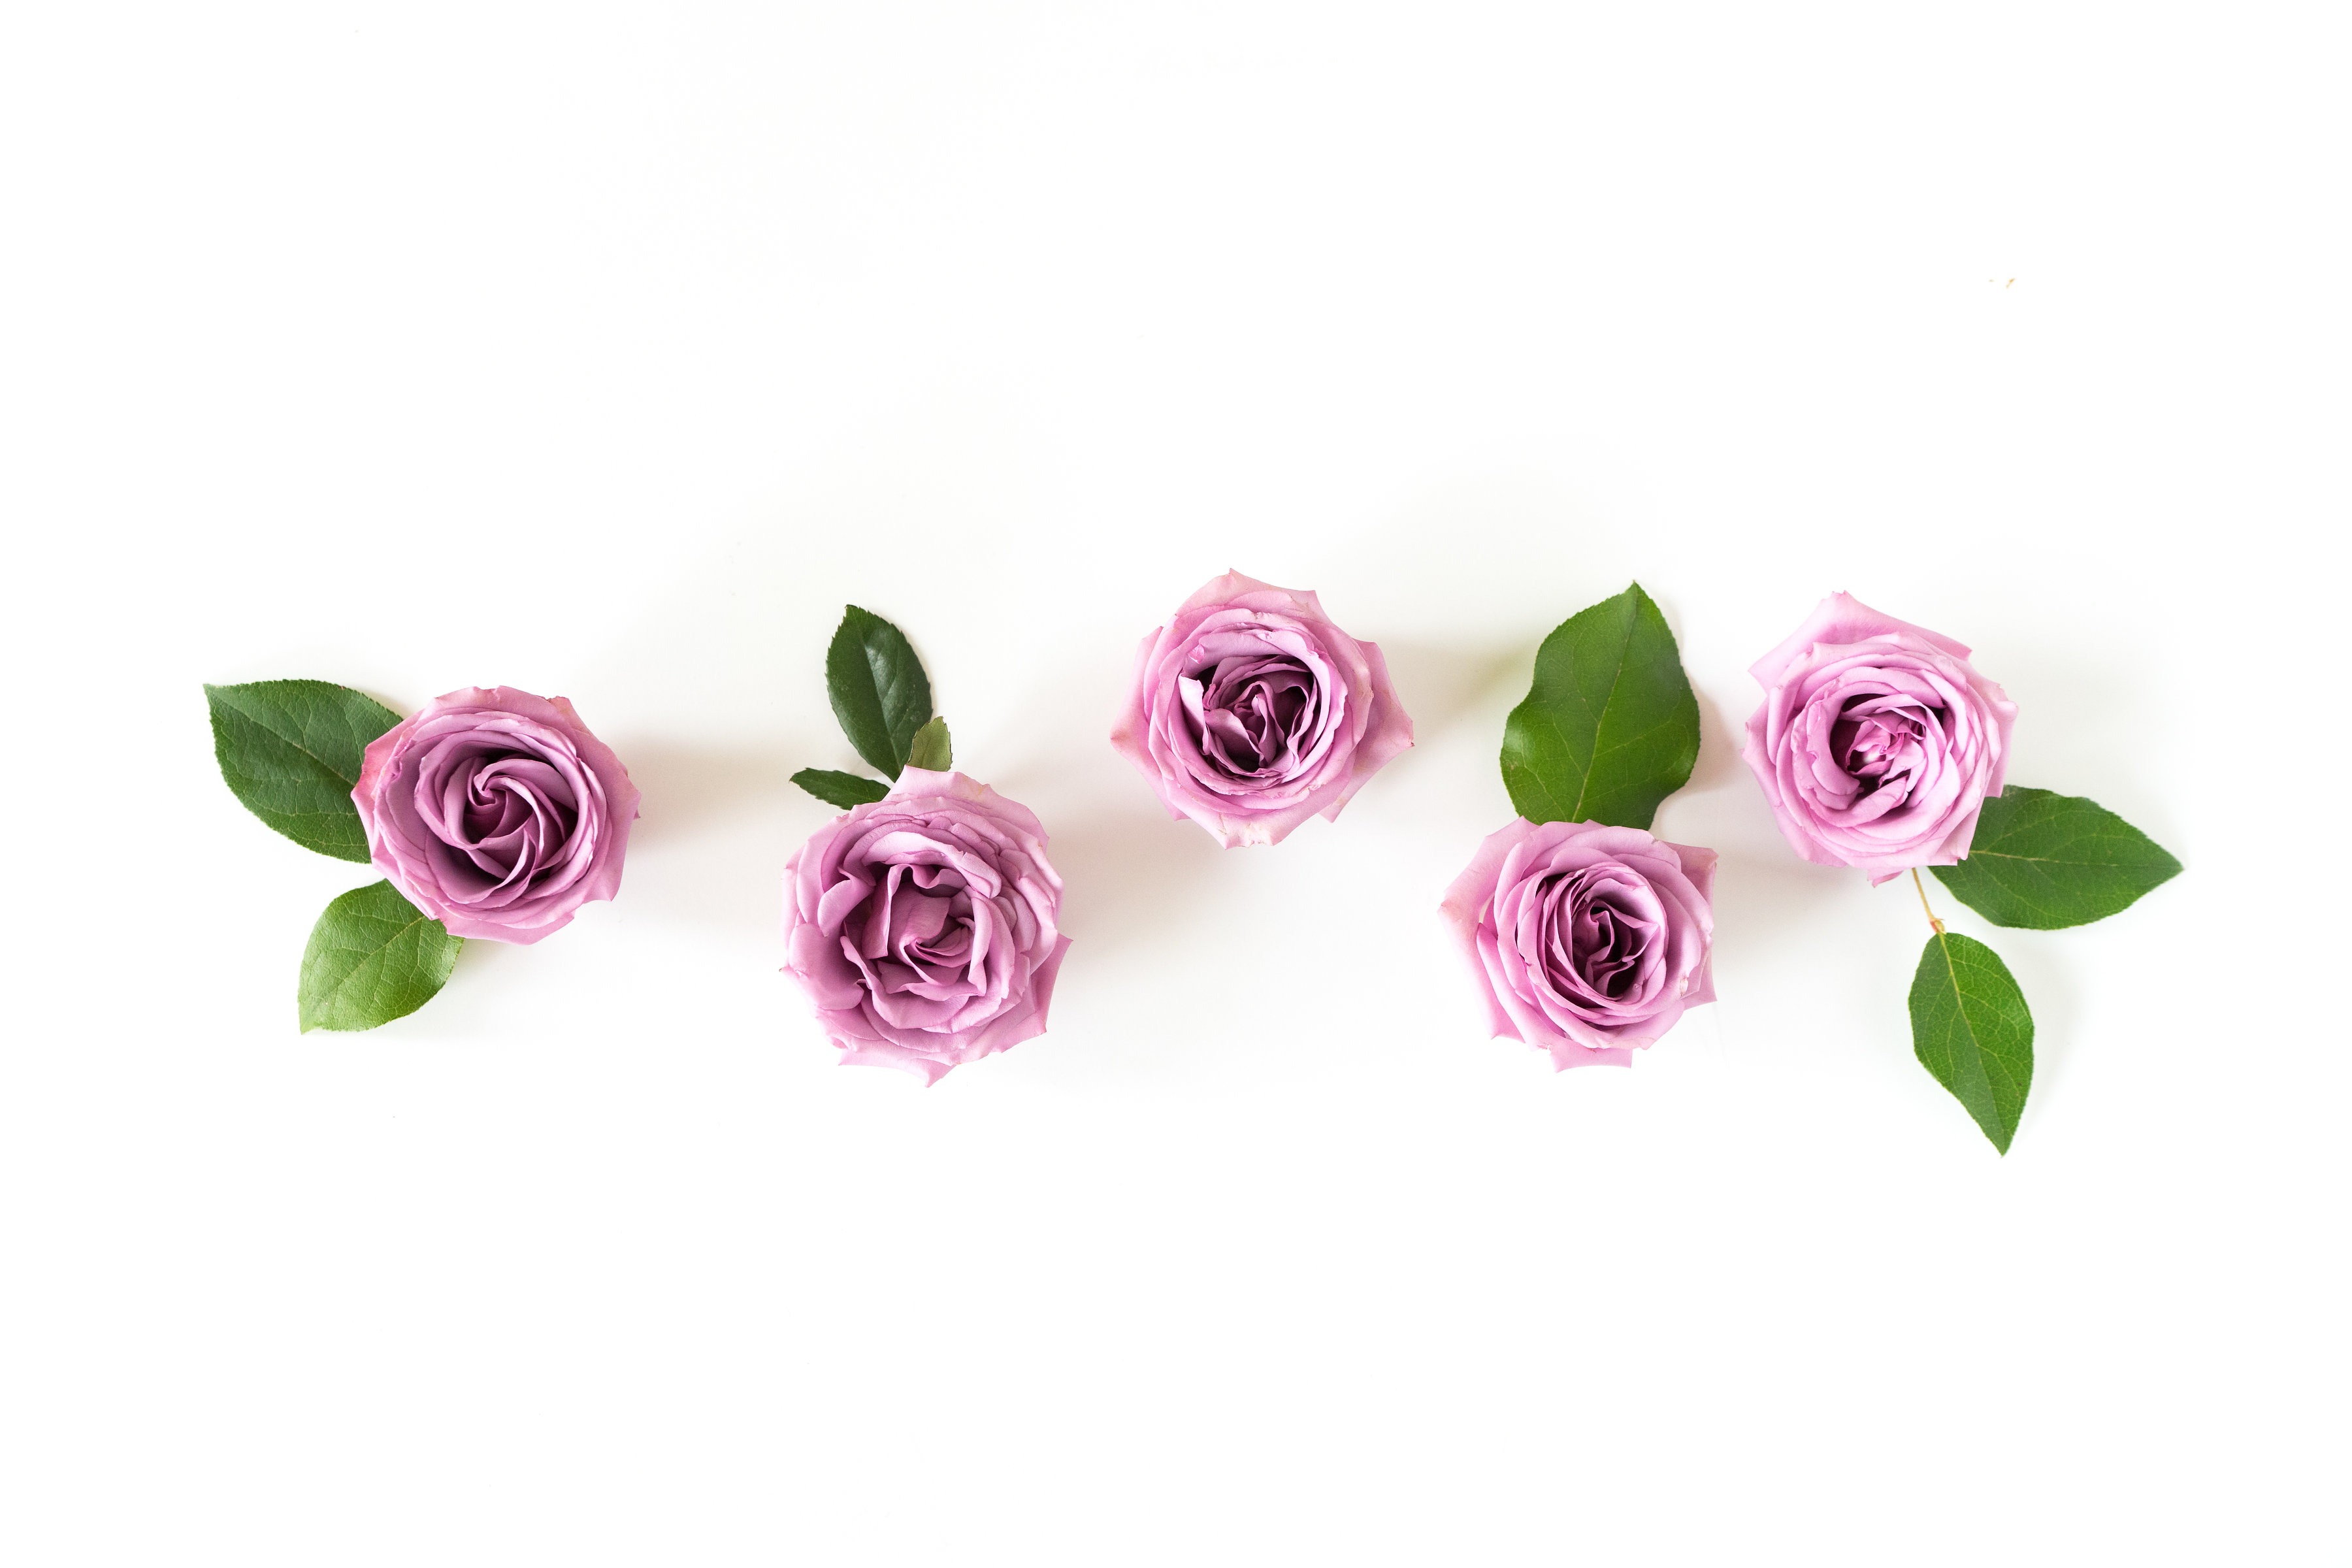 Five Purple Roses on White with Leaves